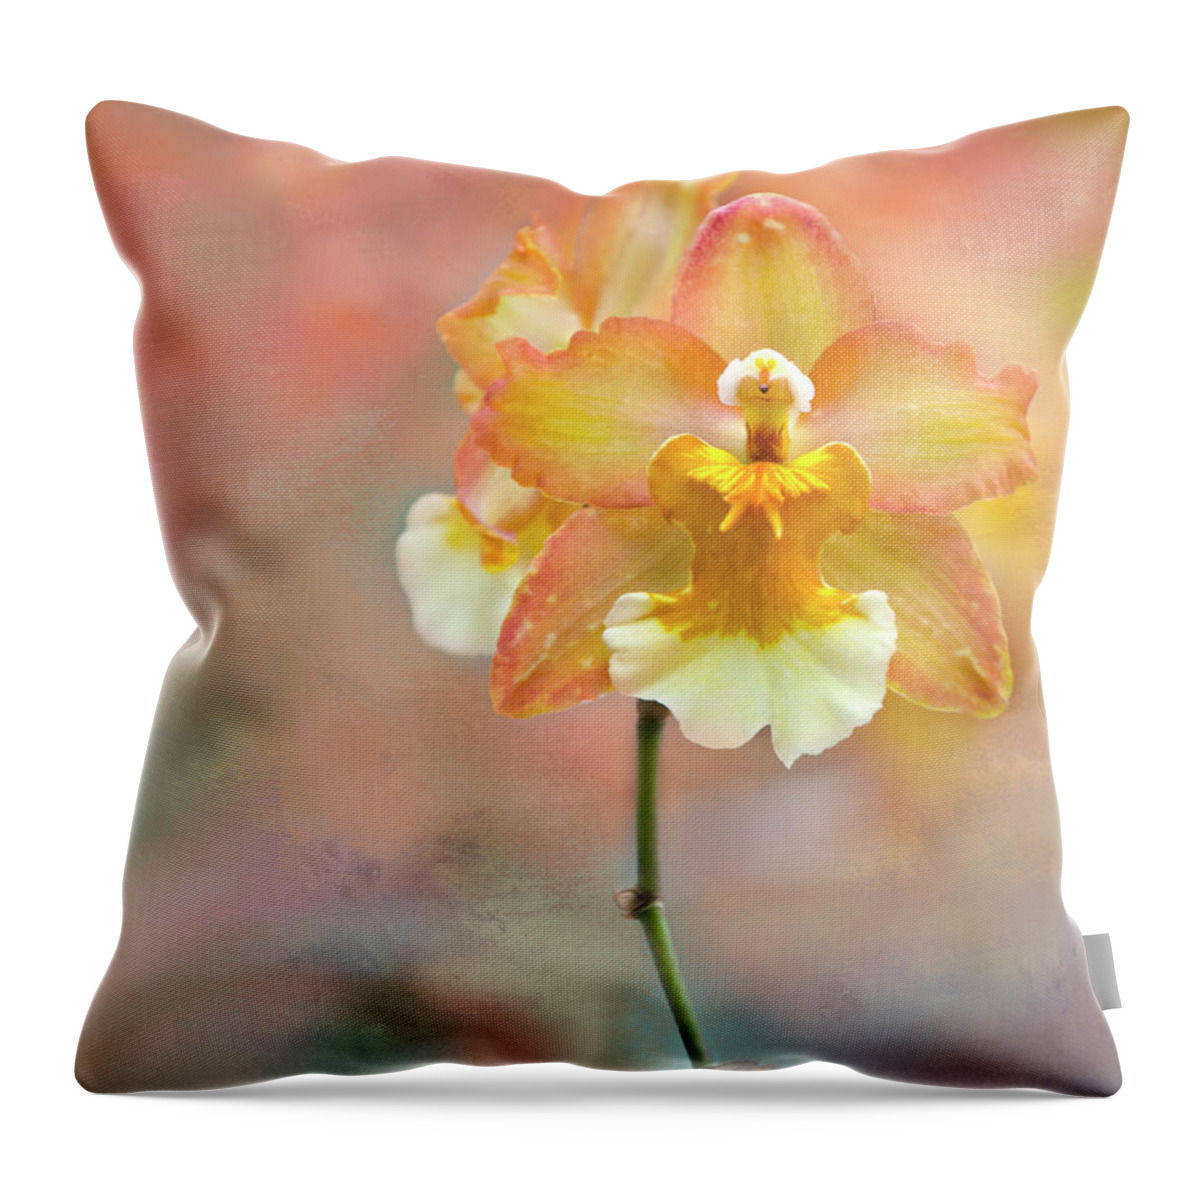 Beautiful Throw Pillow featuring the photograph Yellow Orchid by Ann Bridges